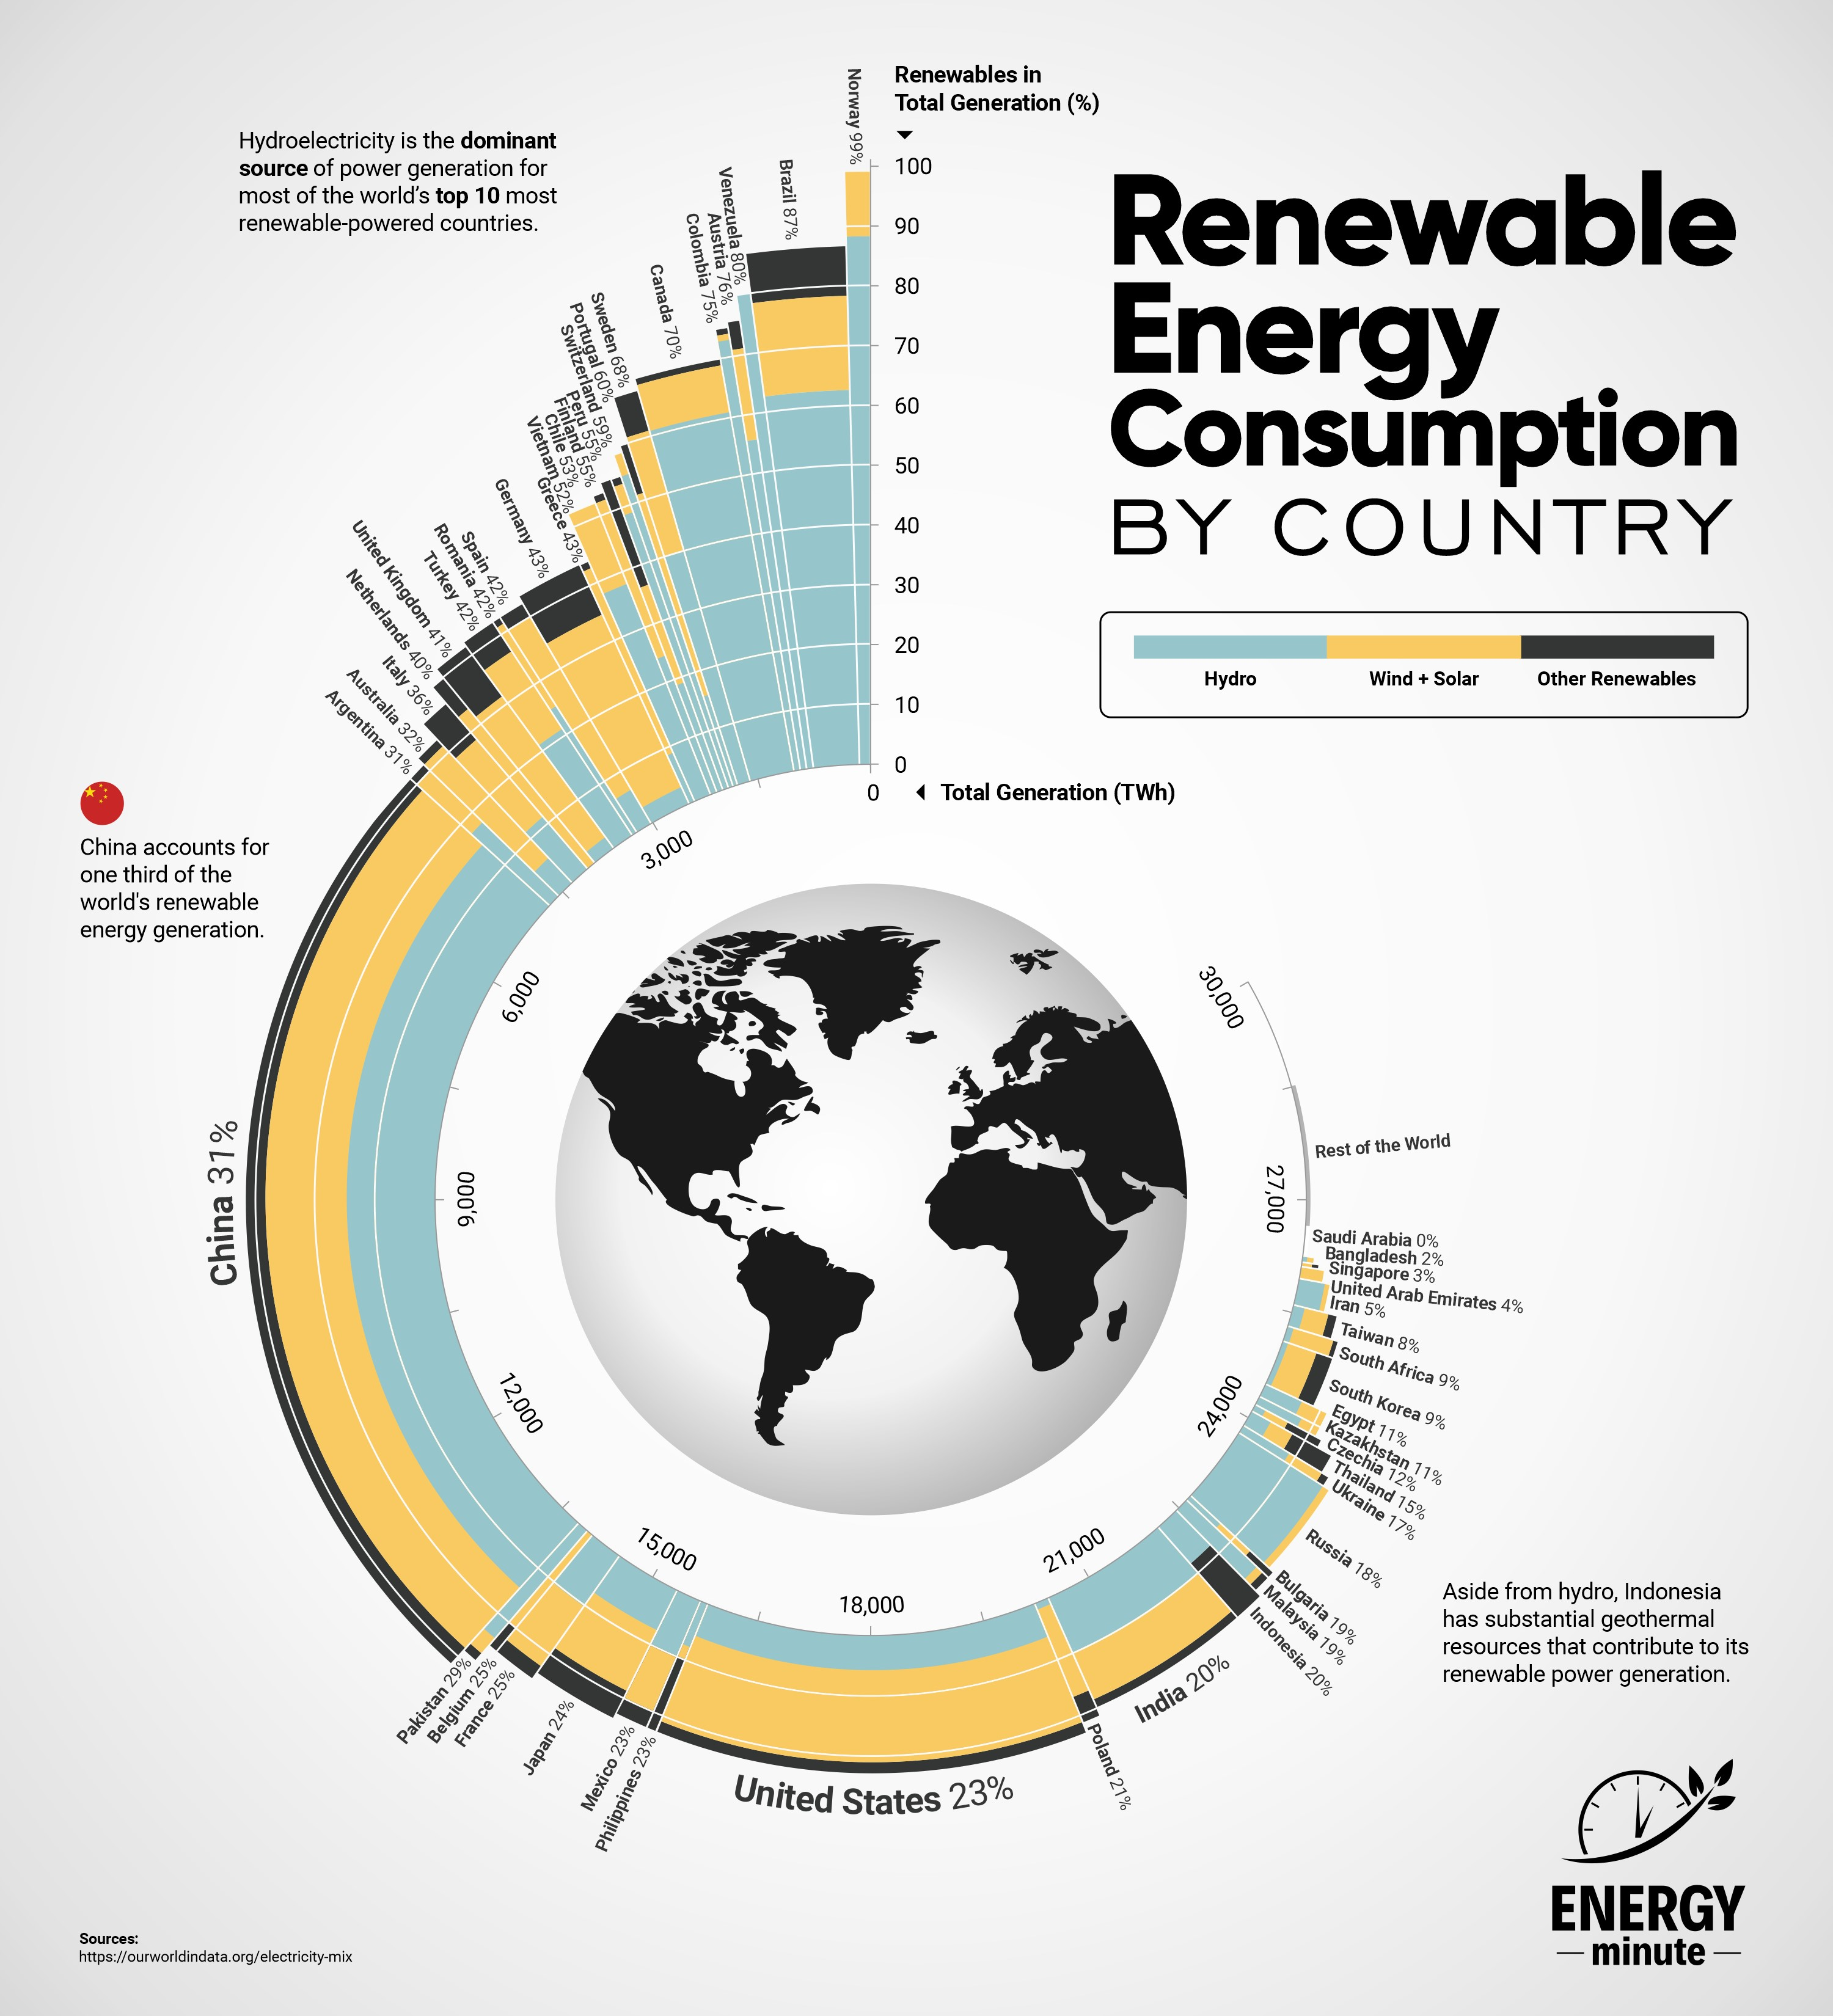 Renewable Energy Consumption by Country